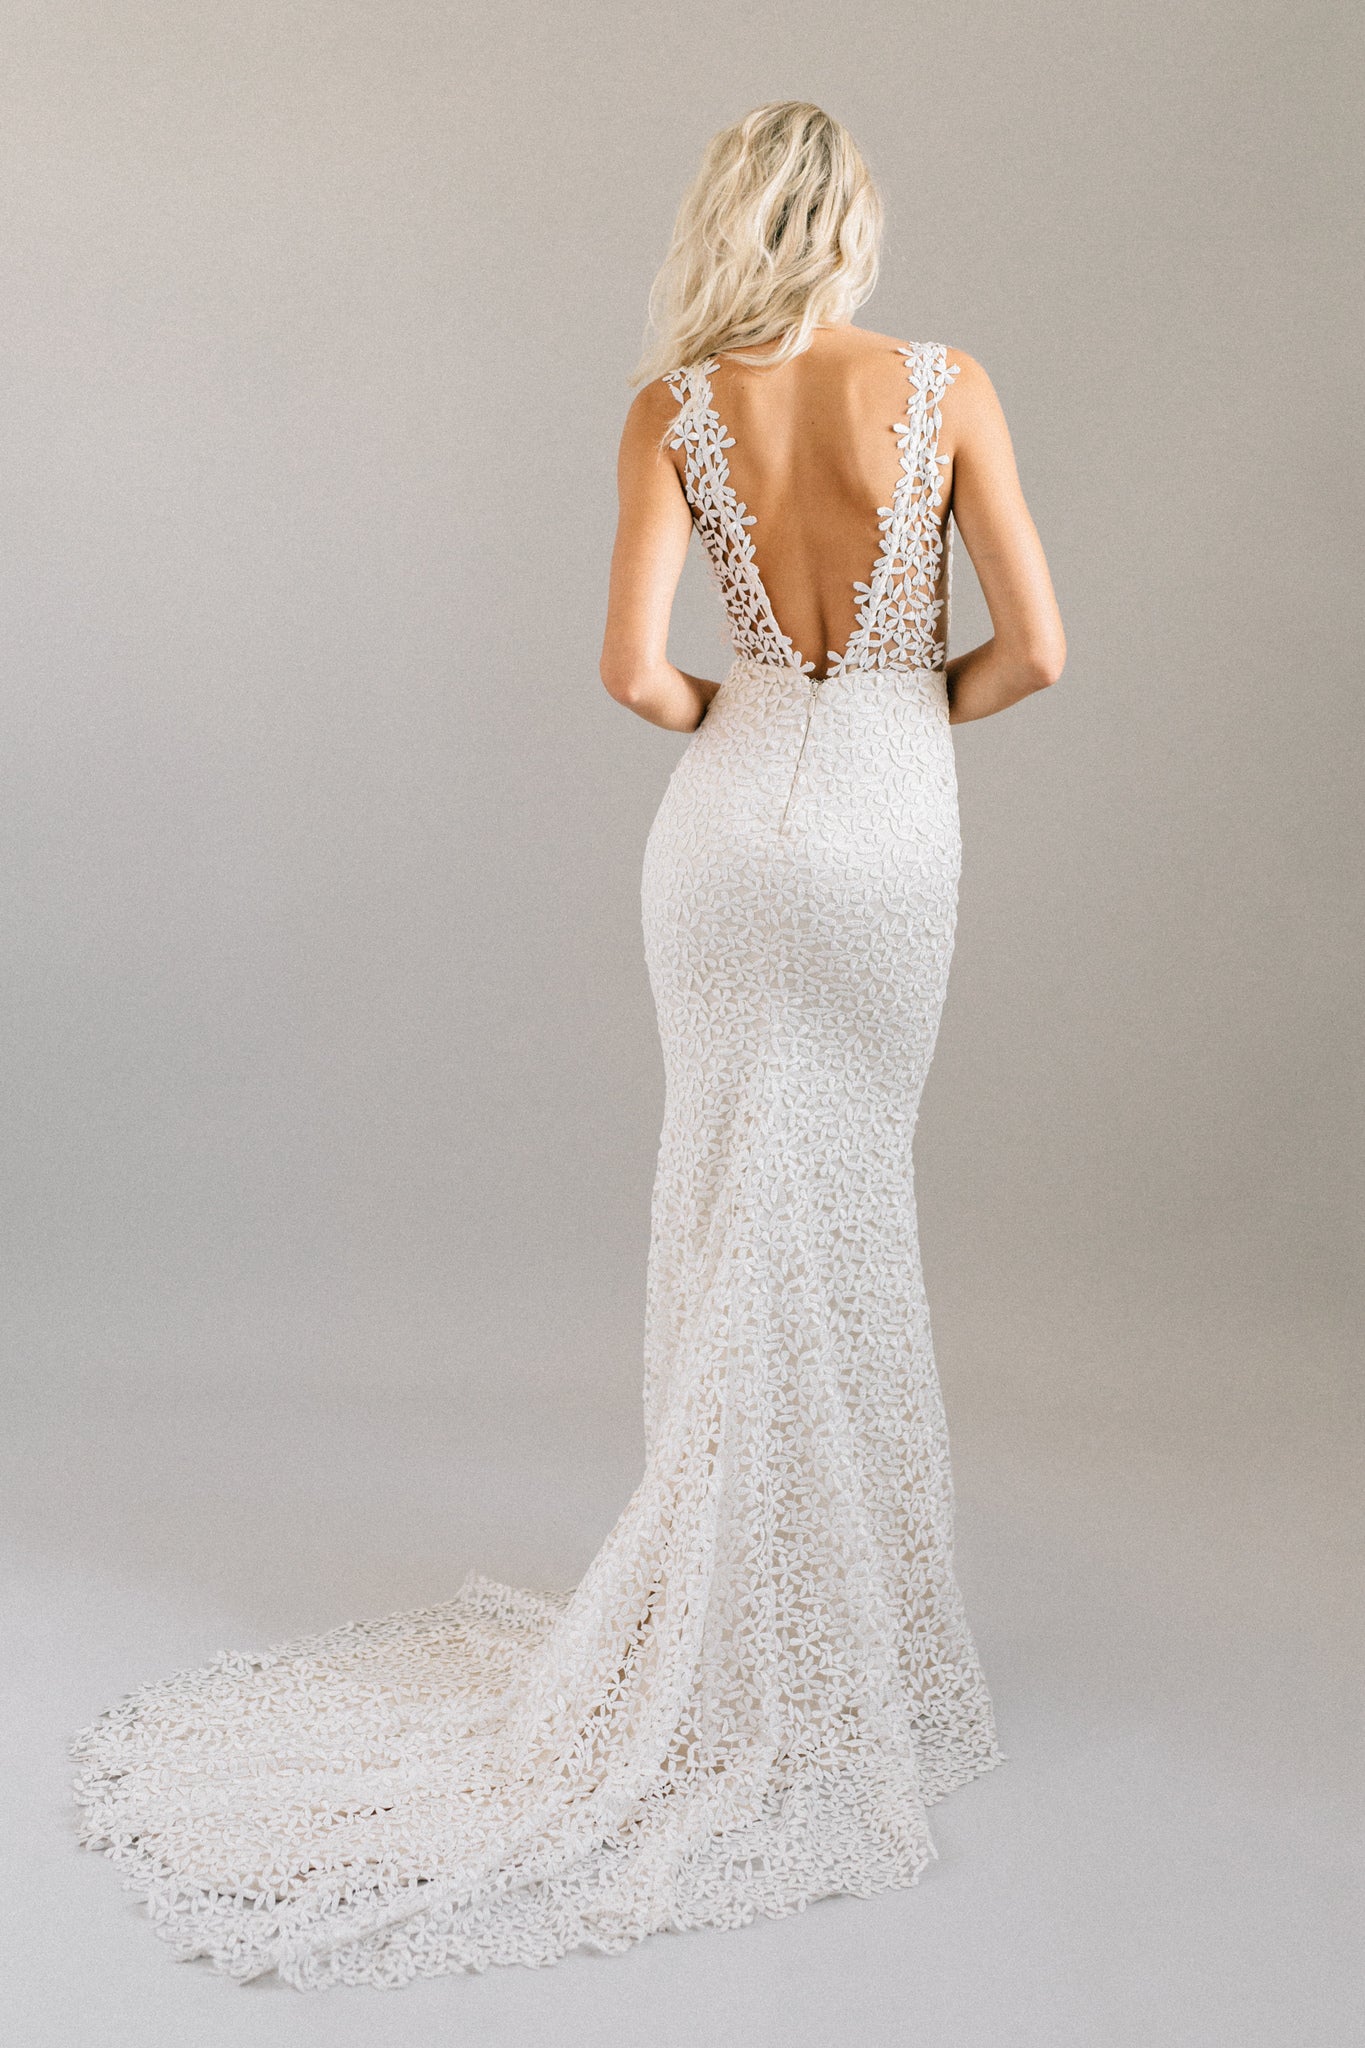 Form-fitting mermaid wedding dress with an open back, jasmine flower lace, and a dramatic pointed train